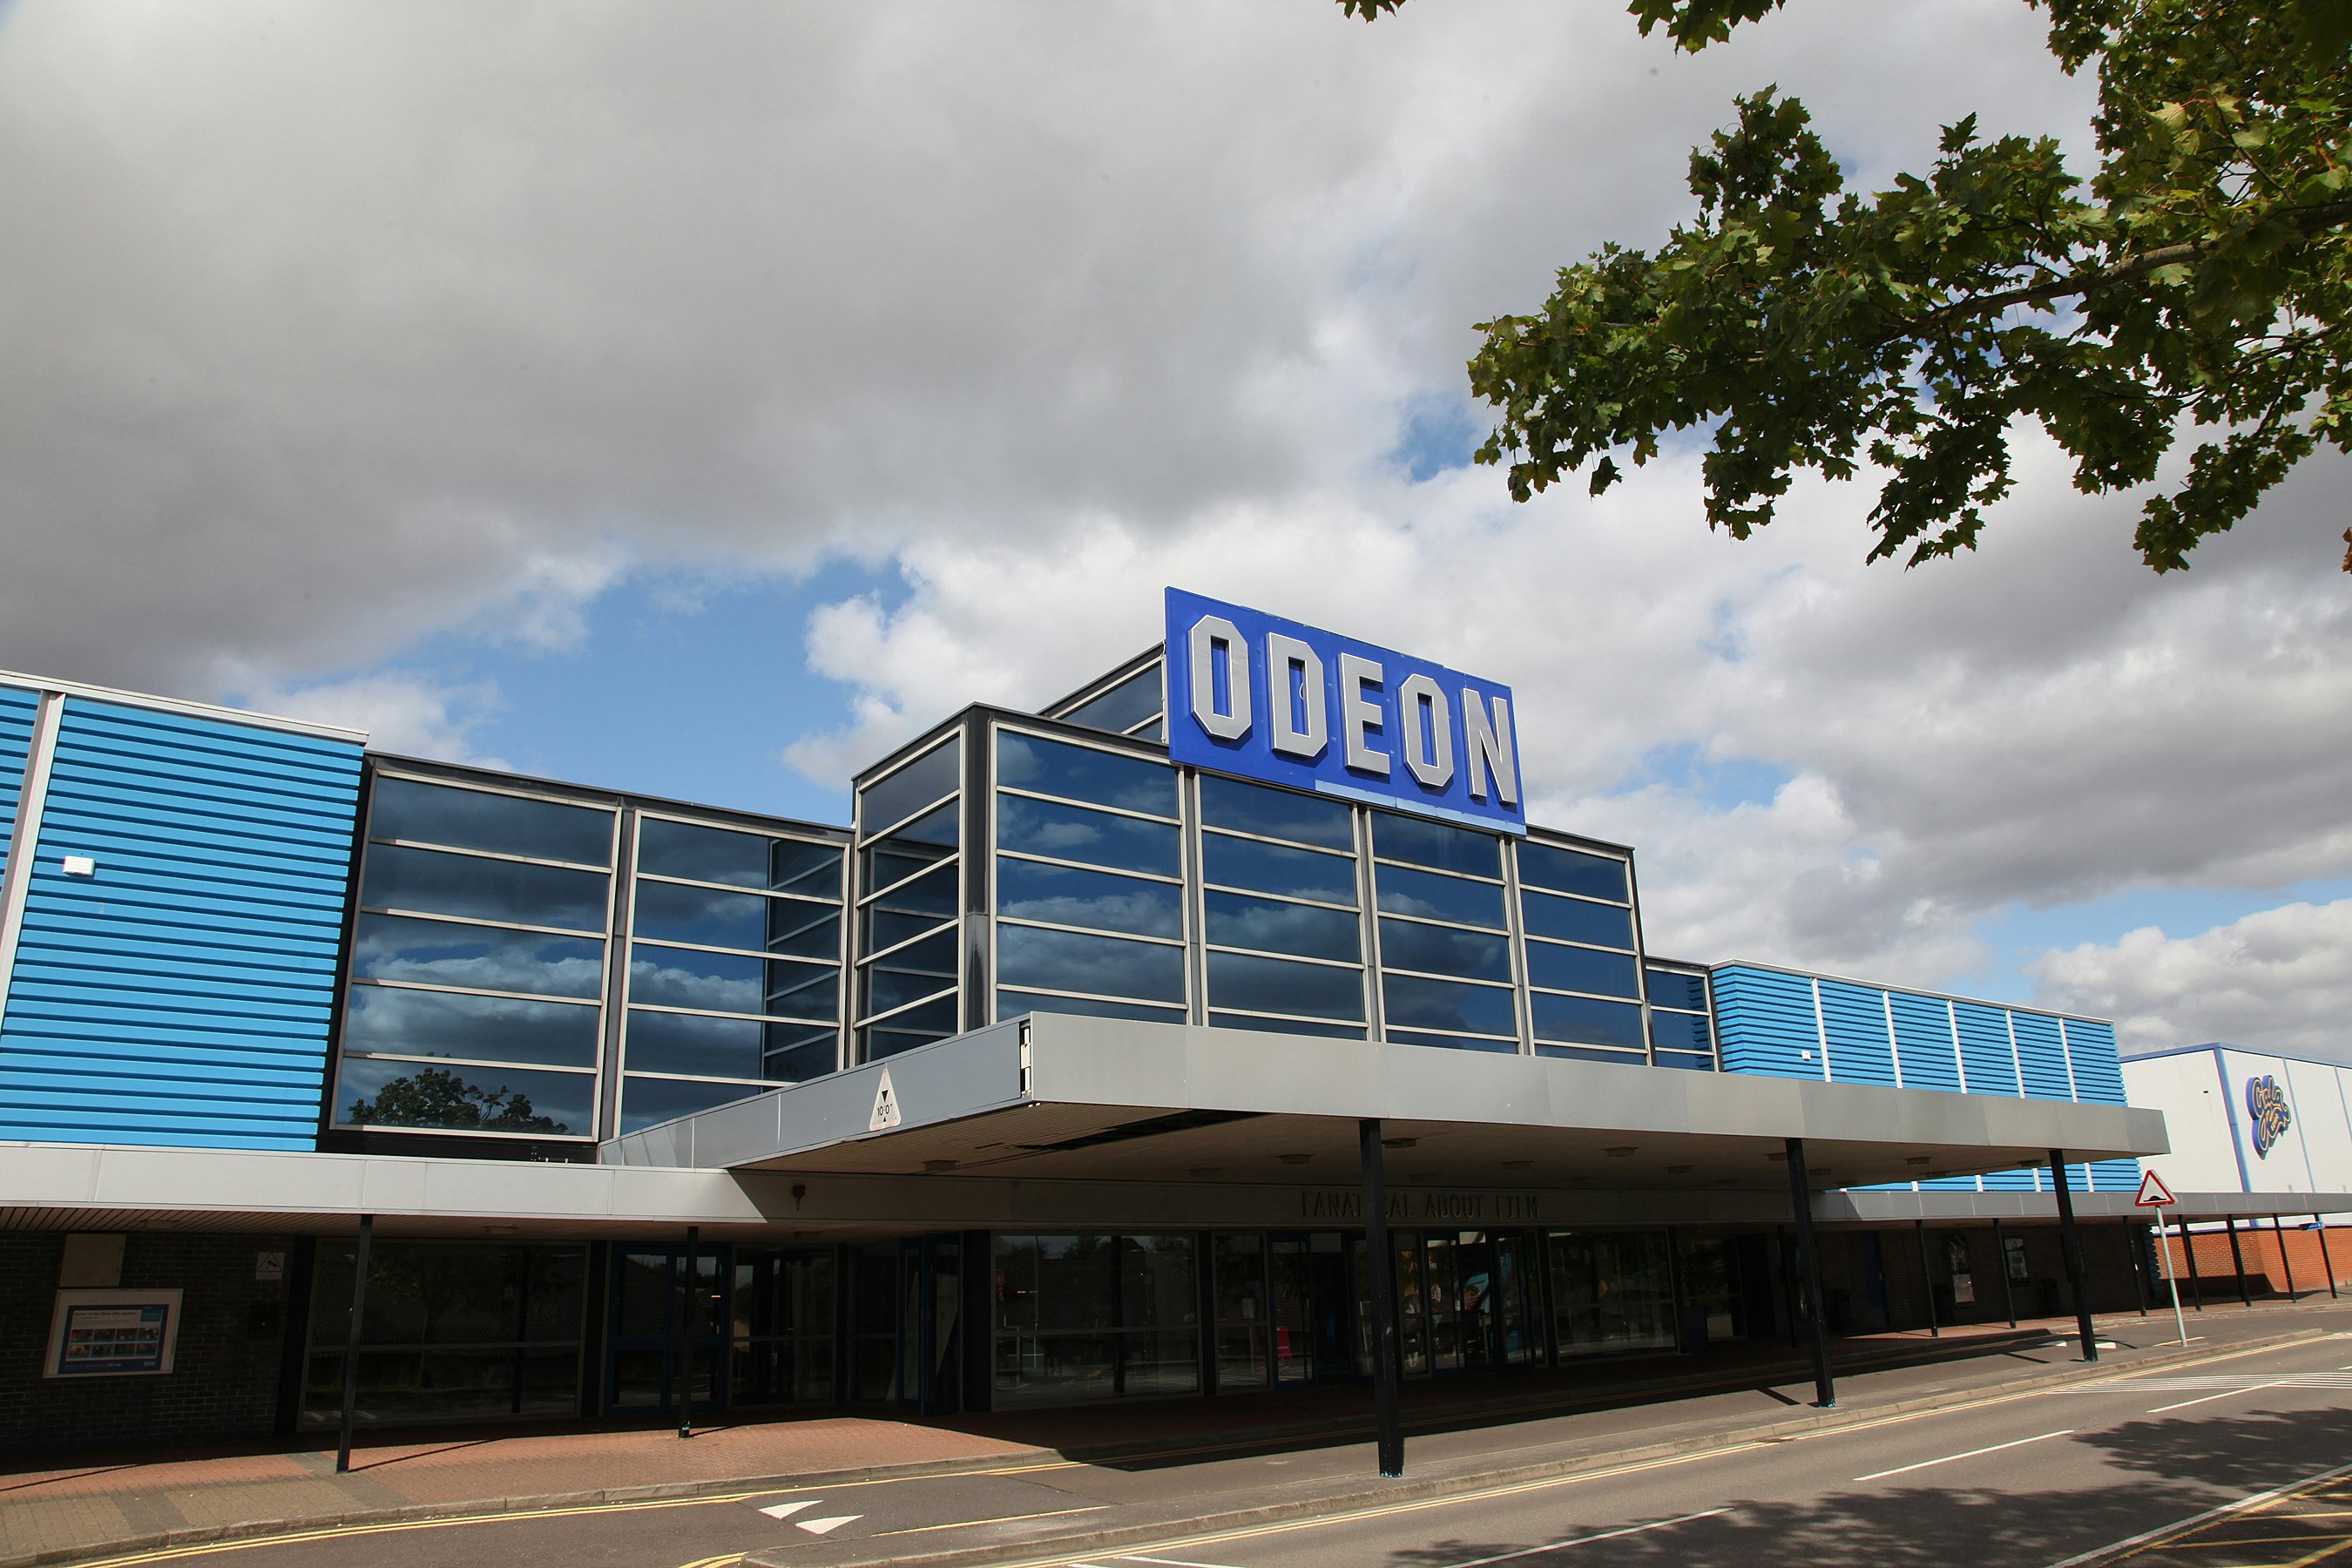 The external of the Odeon. A blue and glass fronted building with a large Odeon Sign over the covered entrance way.